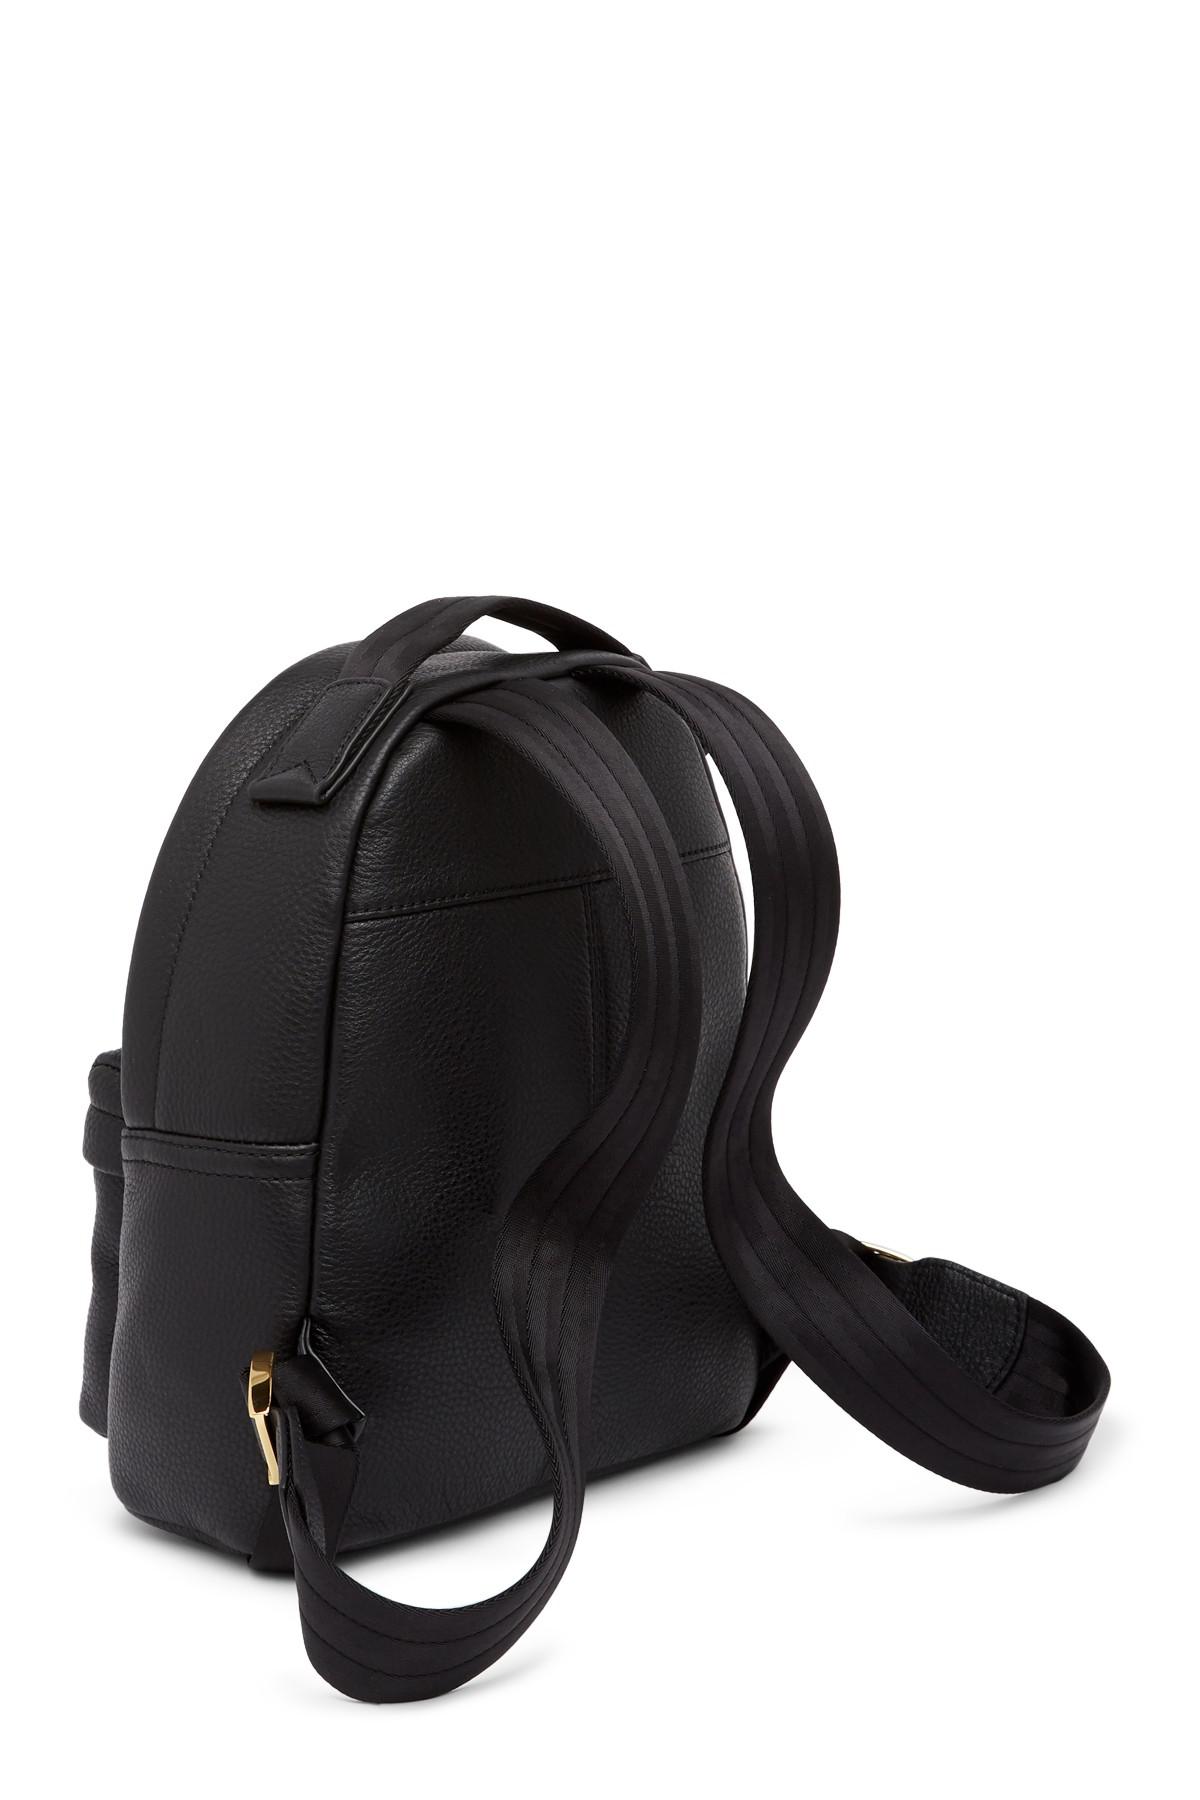 Marc Jacobs Varsity Pack Small Leather Backpack in Black | Lyst